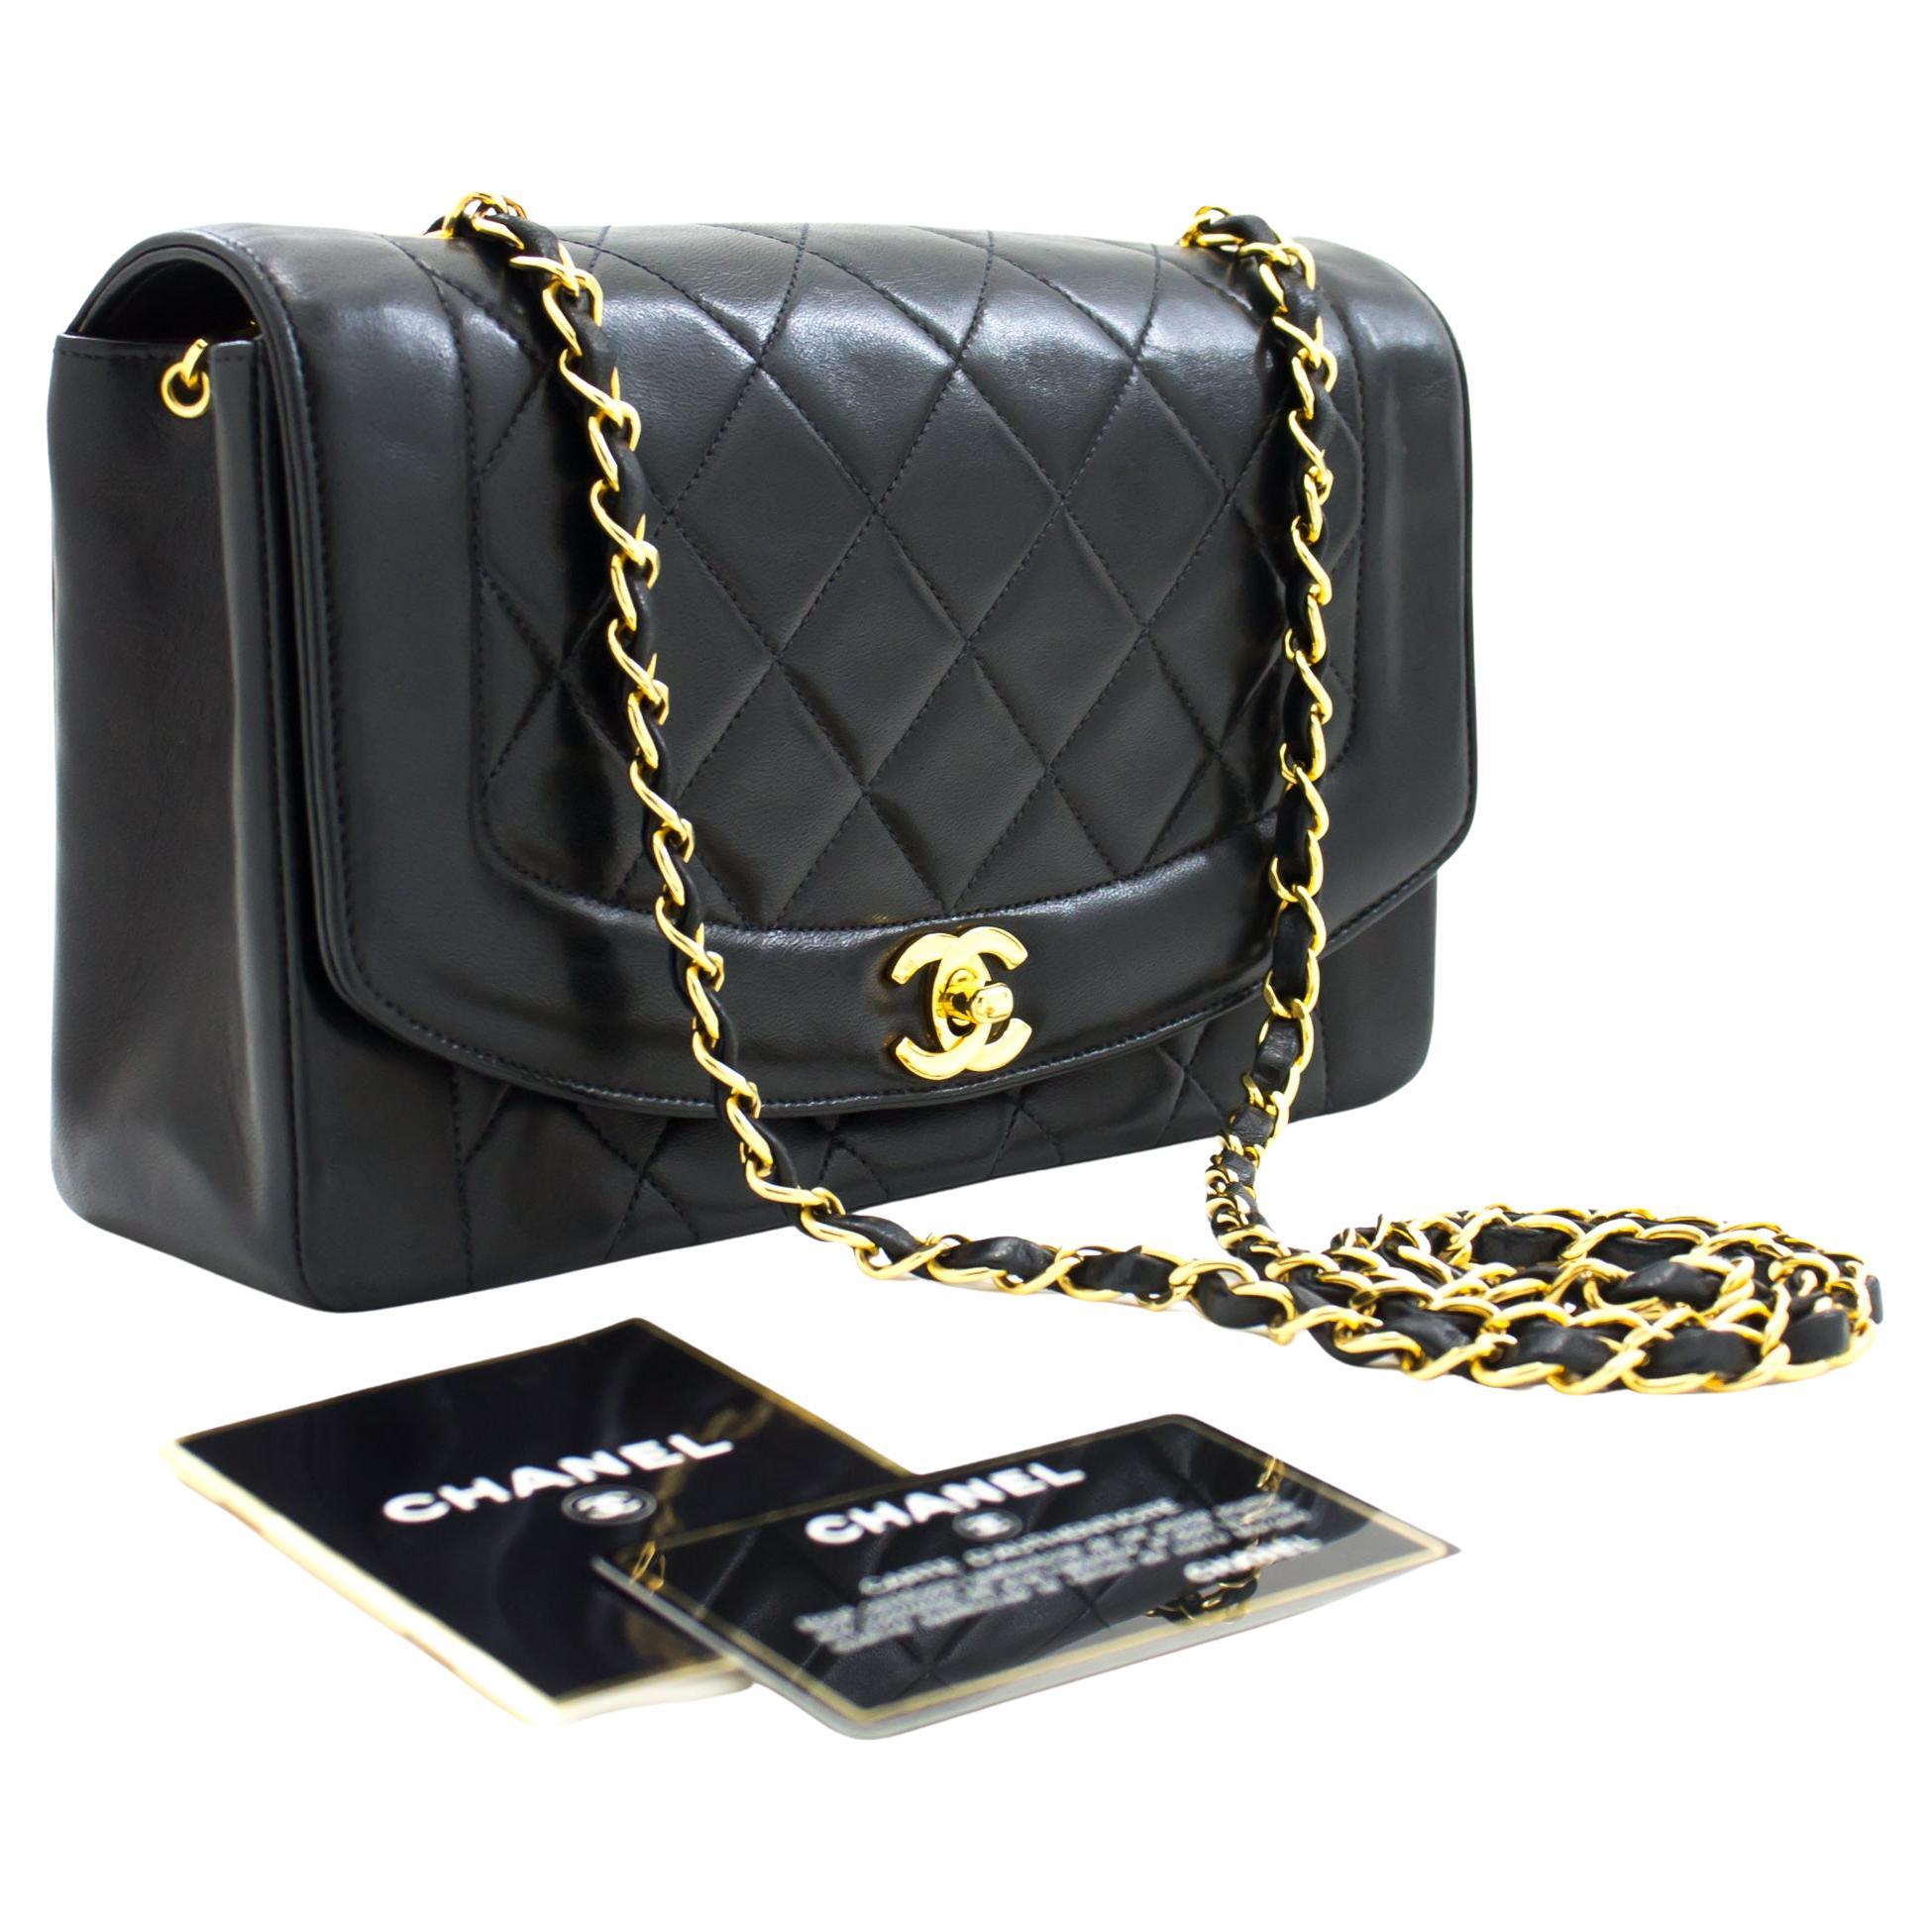 CHANEL Diana Chain Flap Shoulder Bag Black Quilted Purse